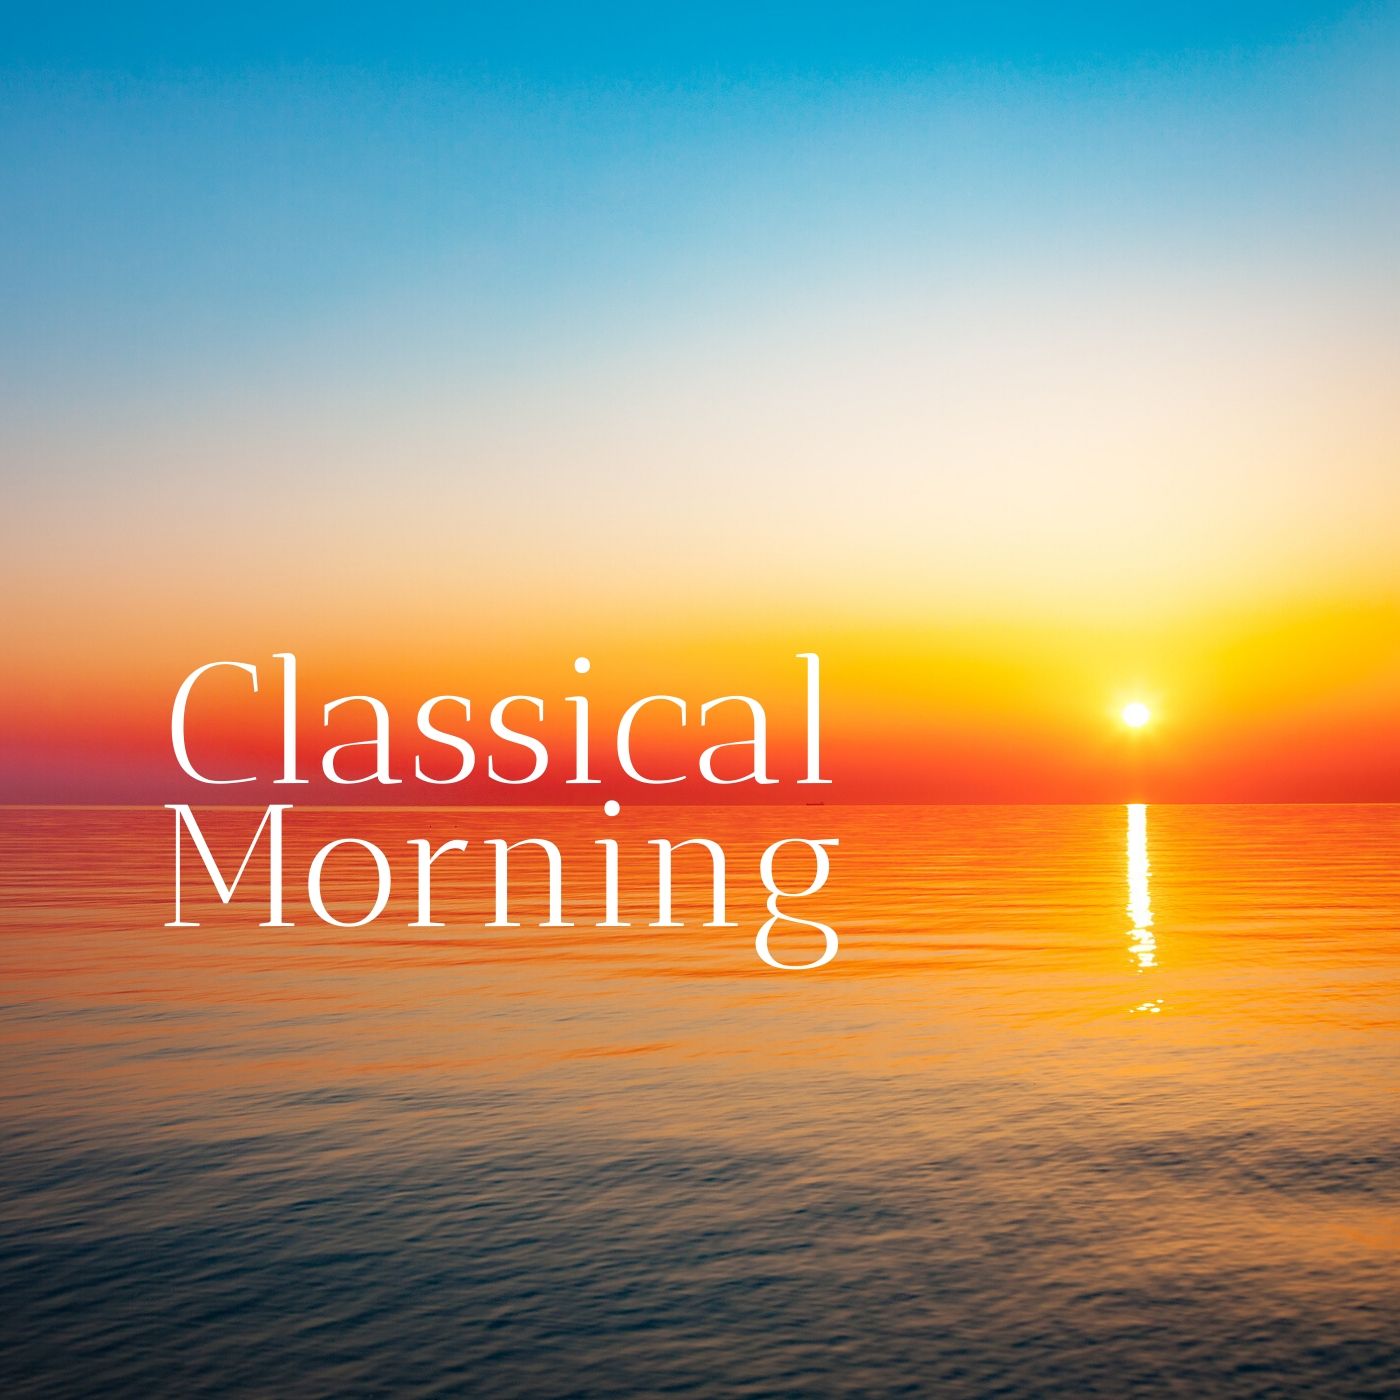 Classical Morning: Relaxing, Uplifting Classical Music